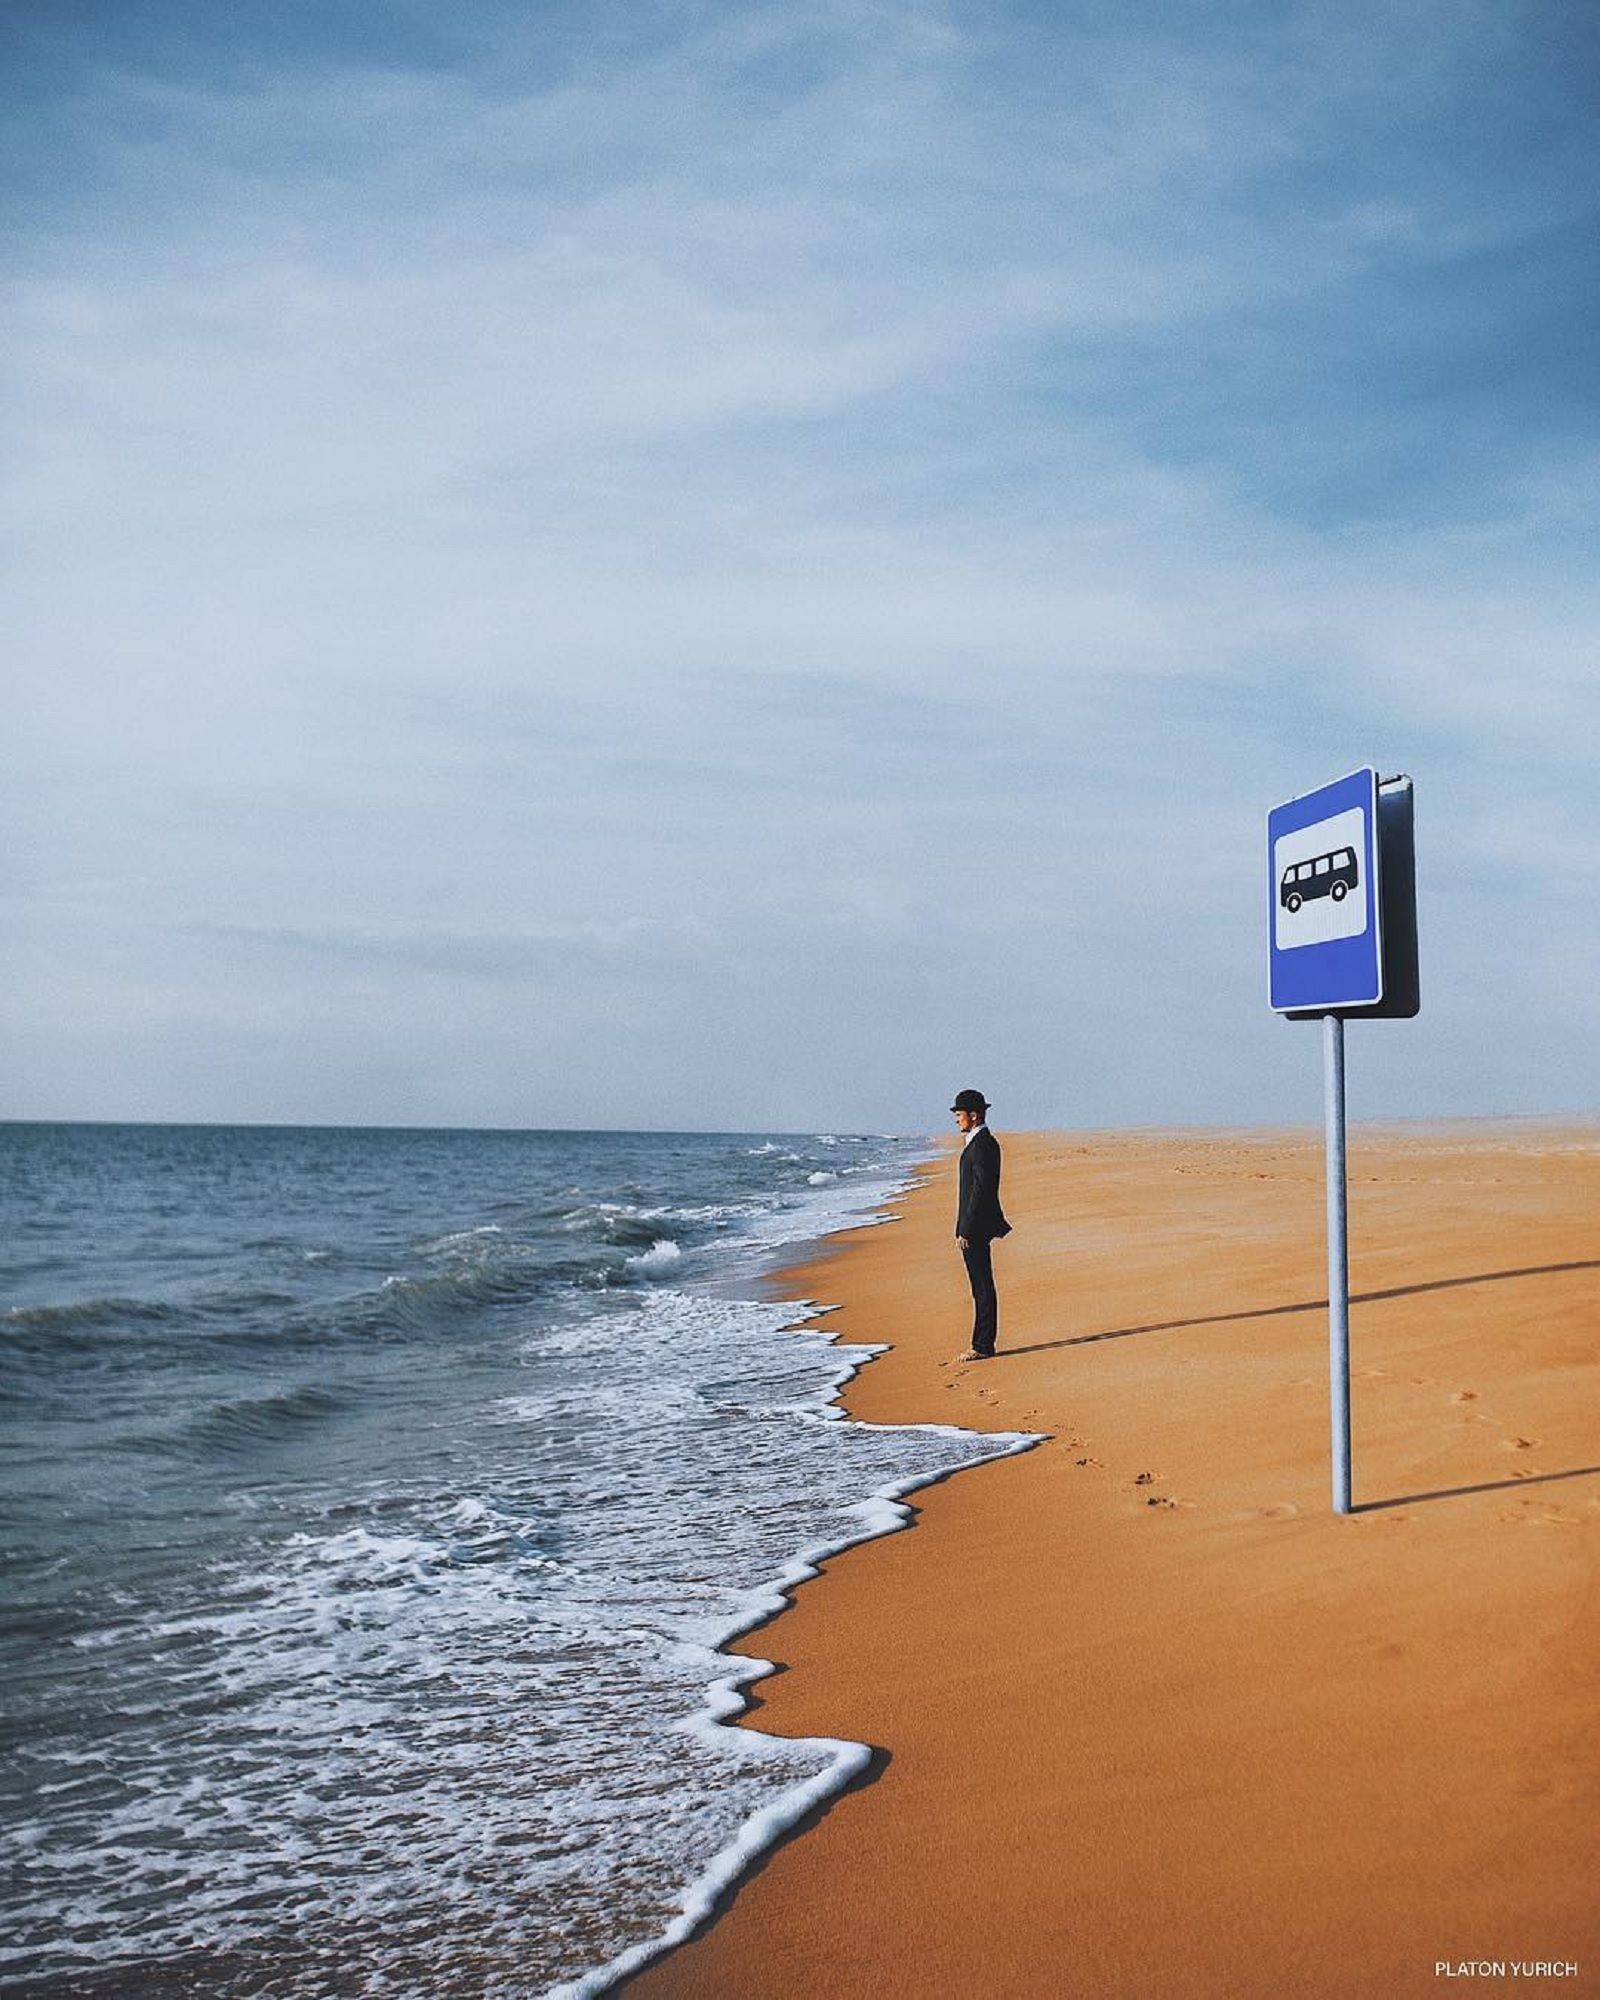 The Finest Surreal Photographers And Image Manipulators Of Instagram image 3